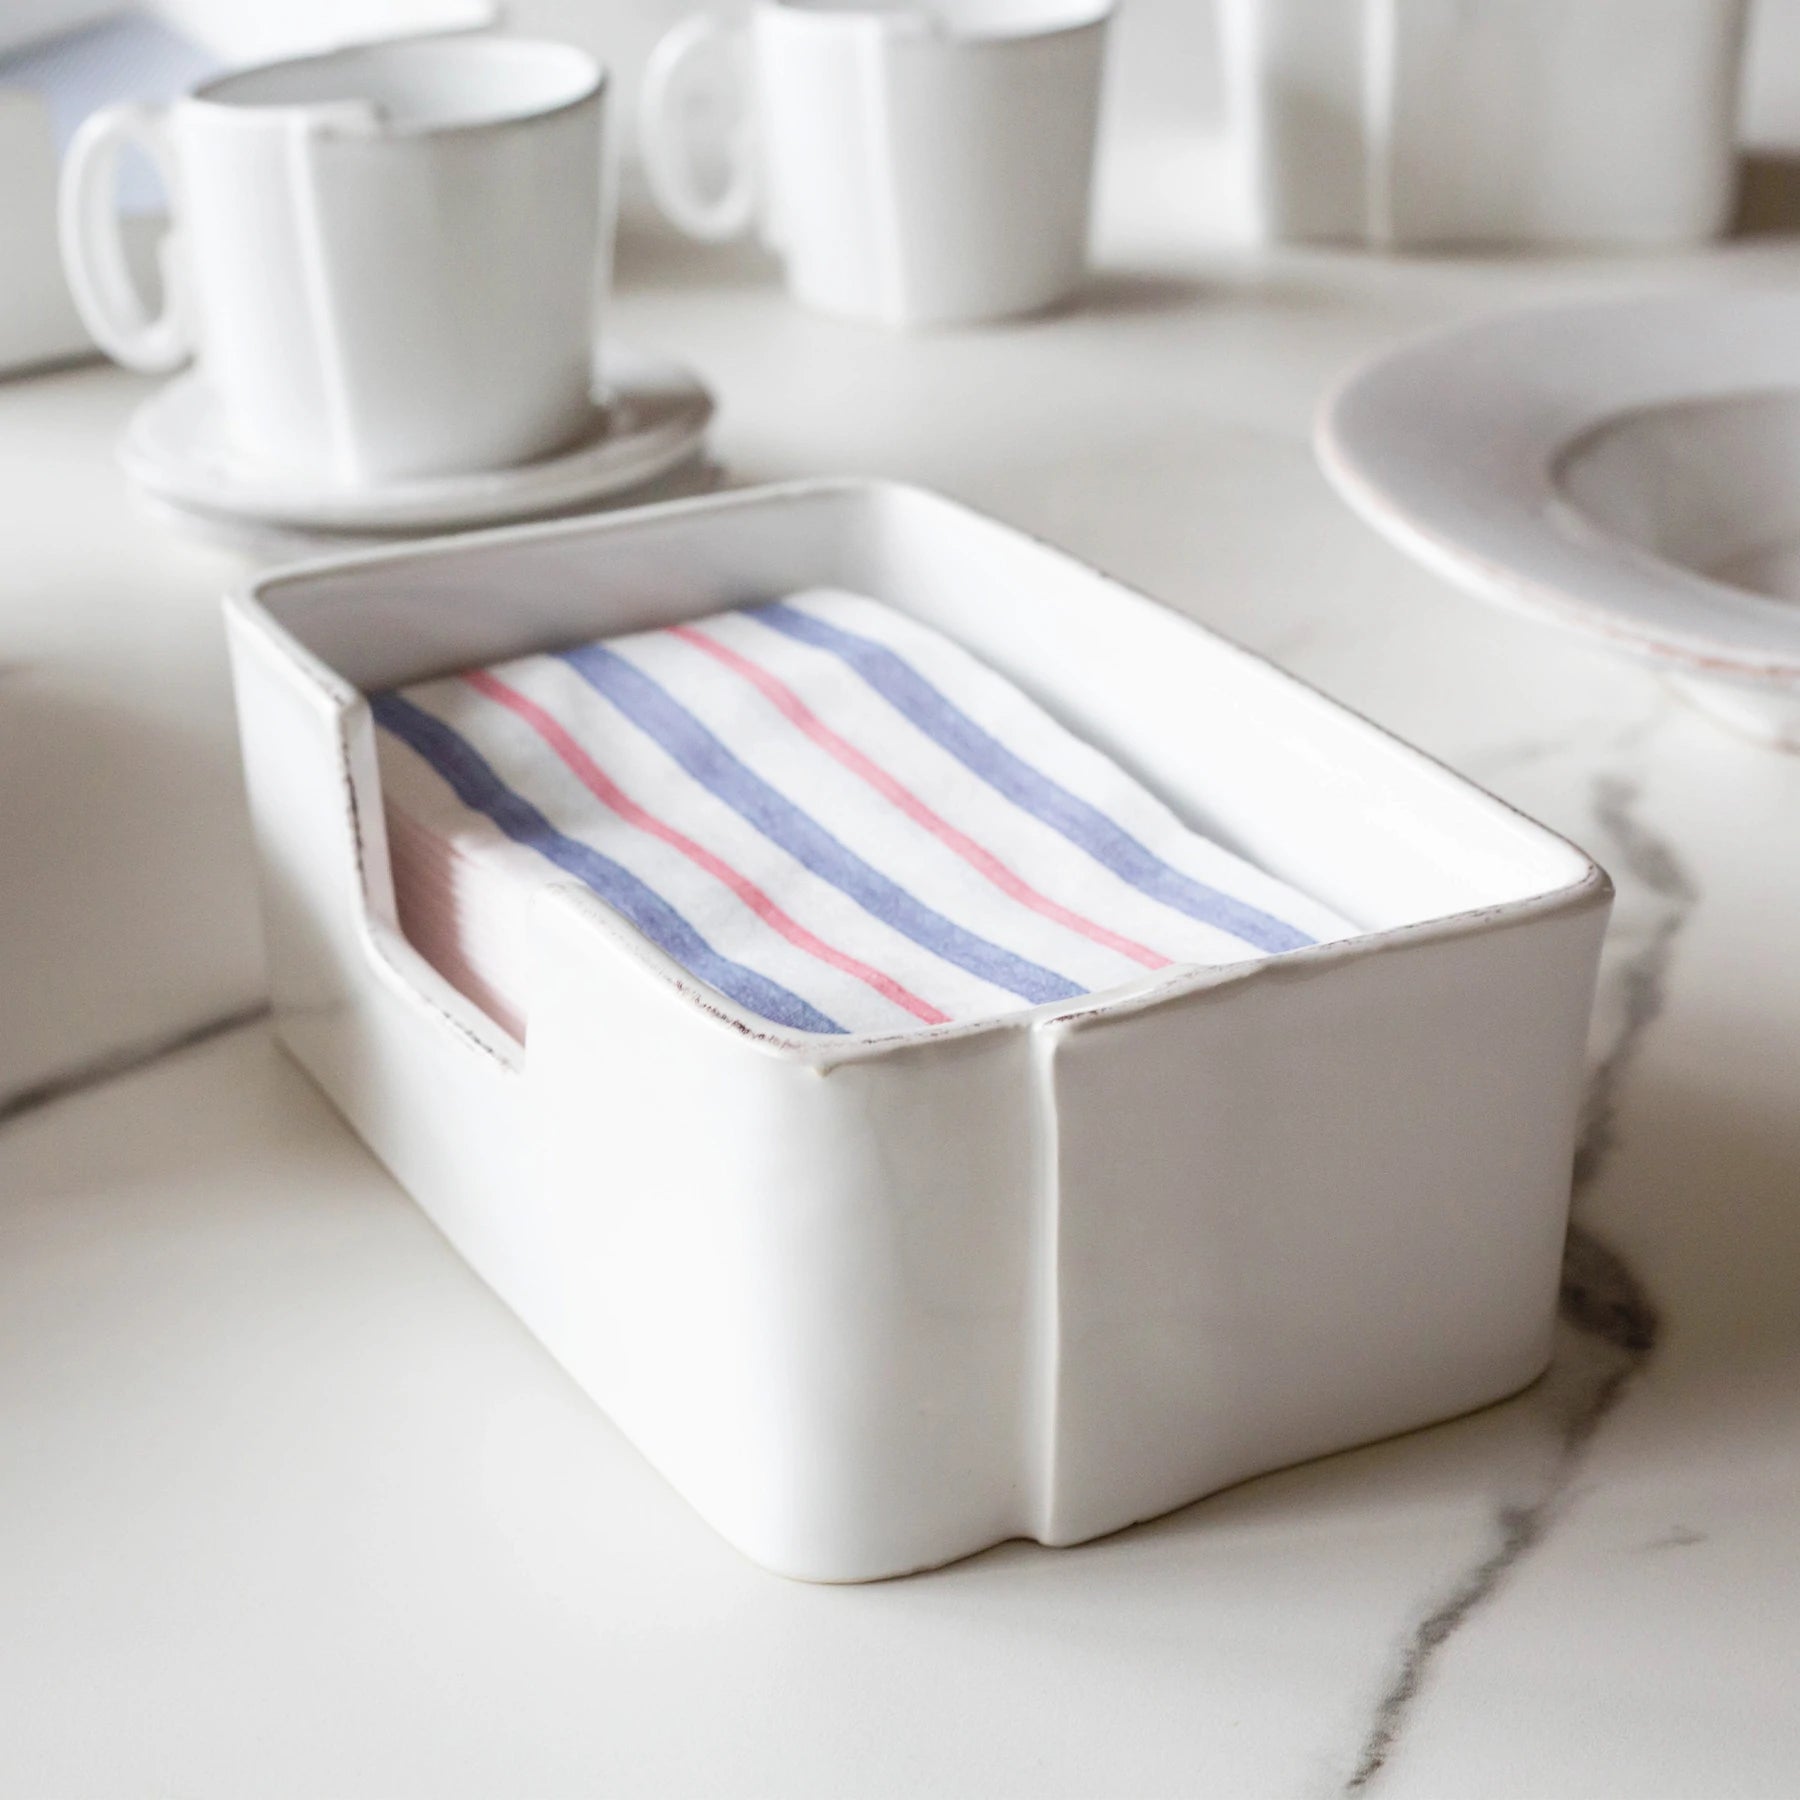 Papersoft Napkins Americana Stripe Guest Towels - Pack of 20